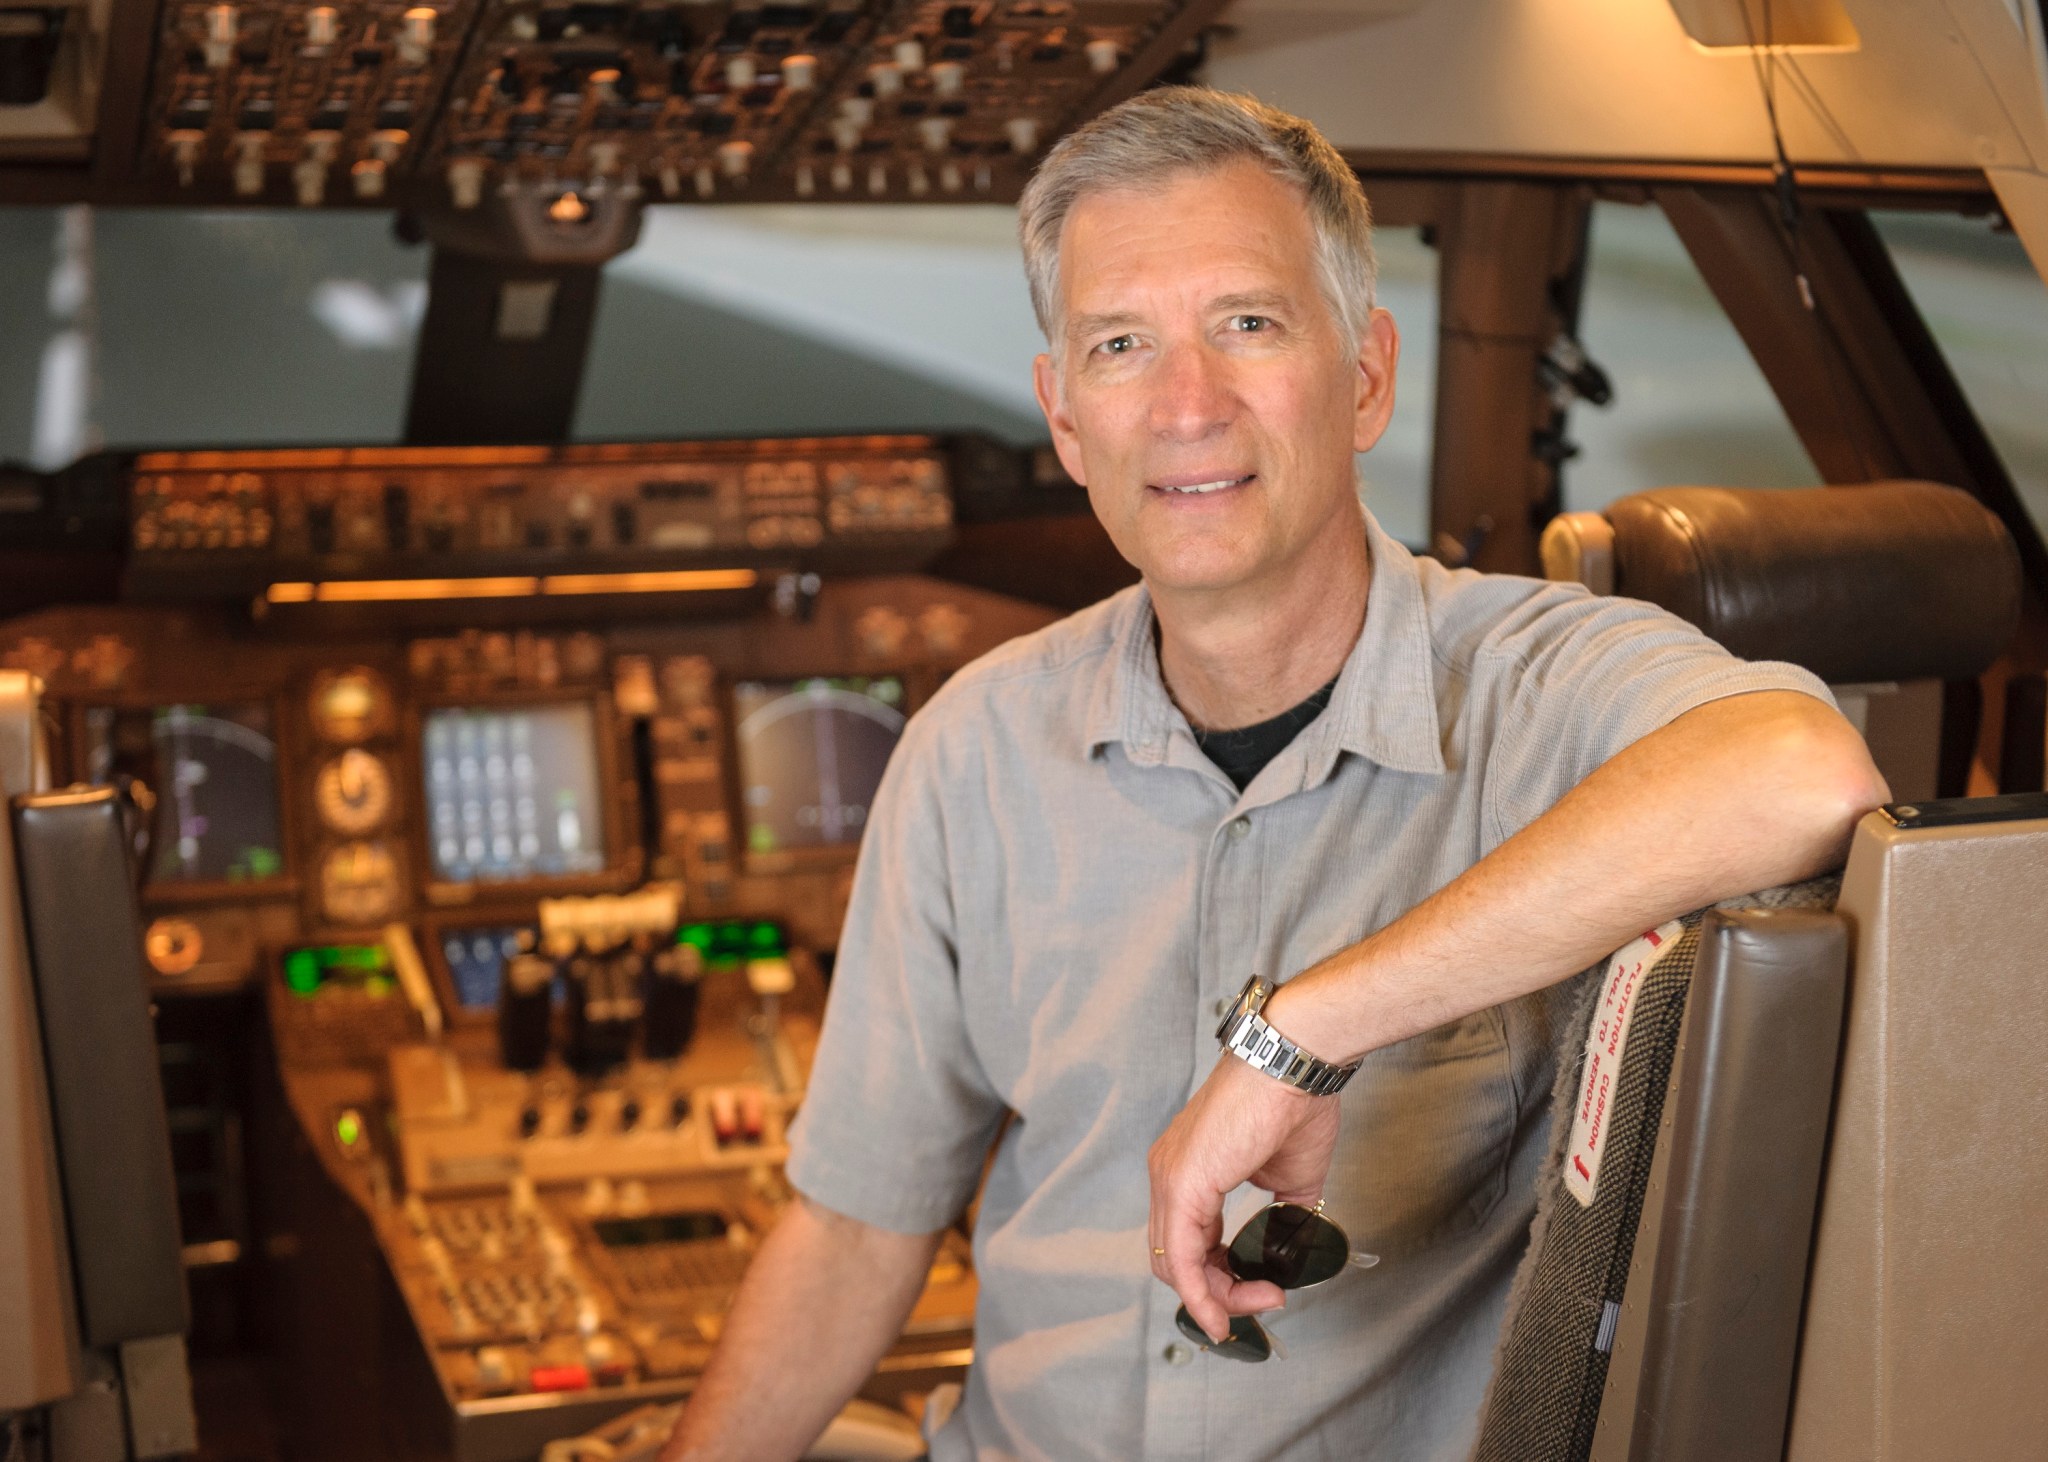 Photo of Immanuel Barshi, ARMD's System-Wide Safety Project research psychologist, sitting inside an airplane's cockpit.